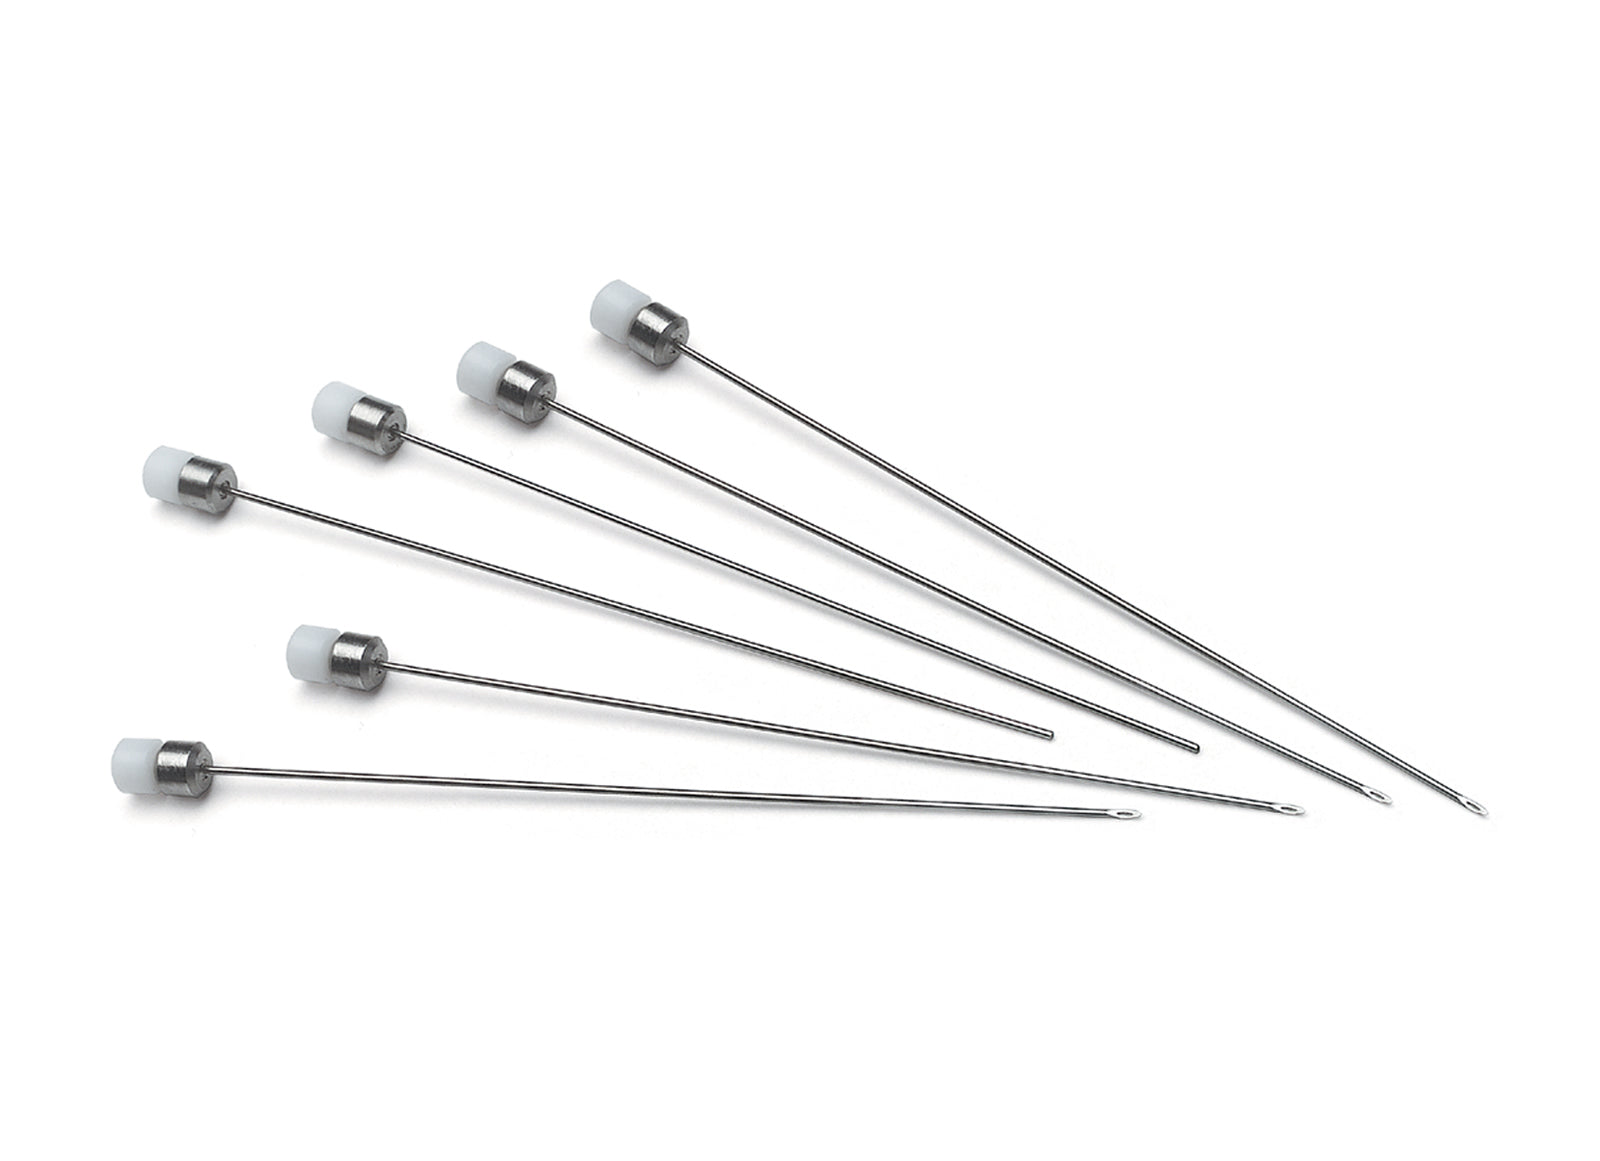 34 gauge, Small Hub RN NDL, custom length (0.375, 0.5, 1.0, and 1.5 in), point style 3 or 4, 6/PK